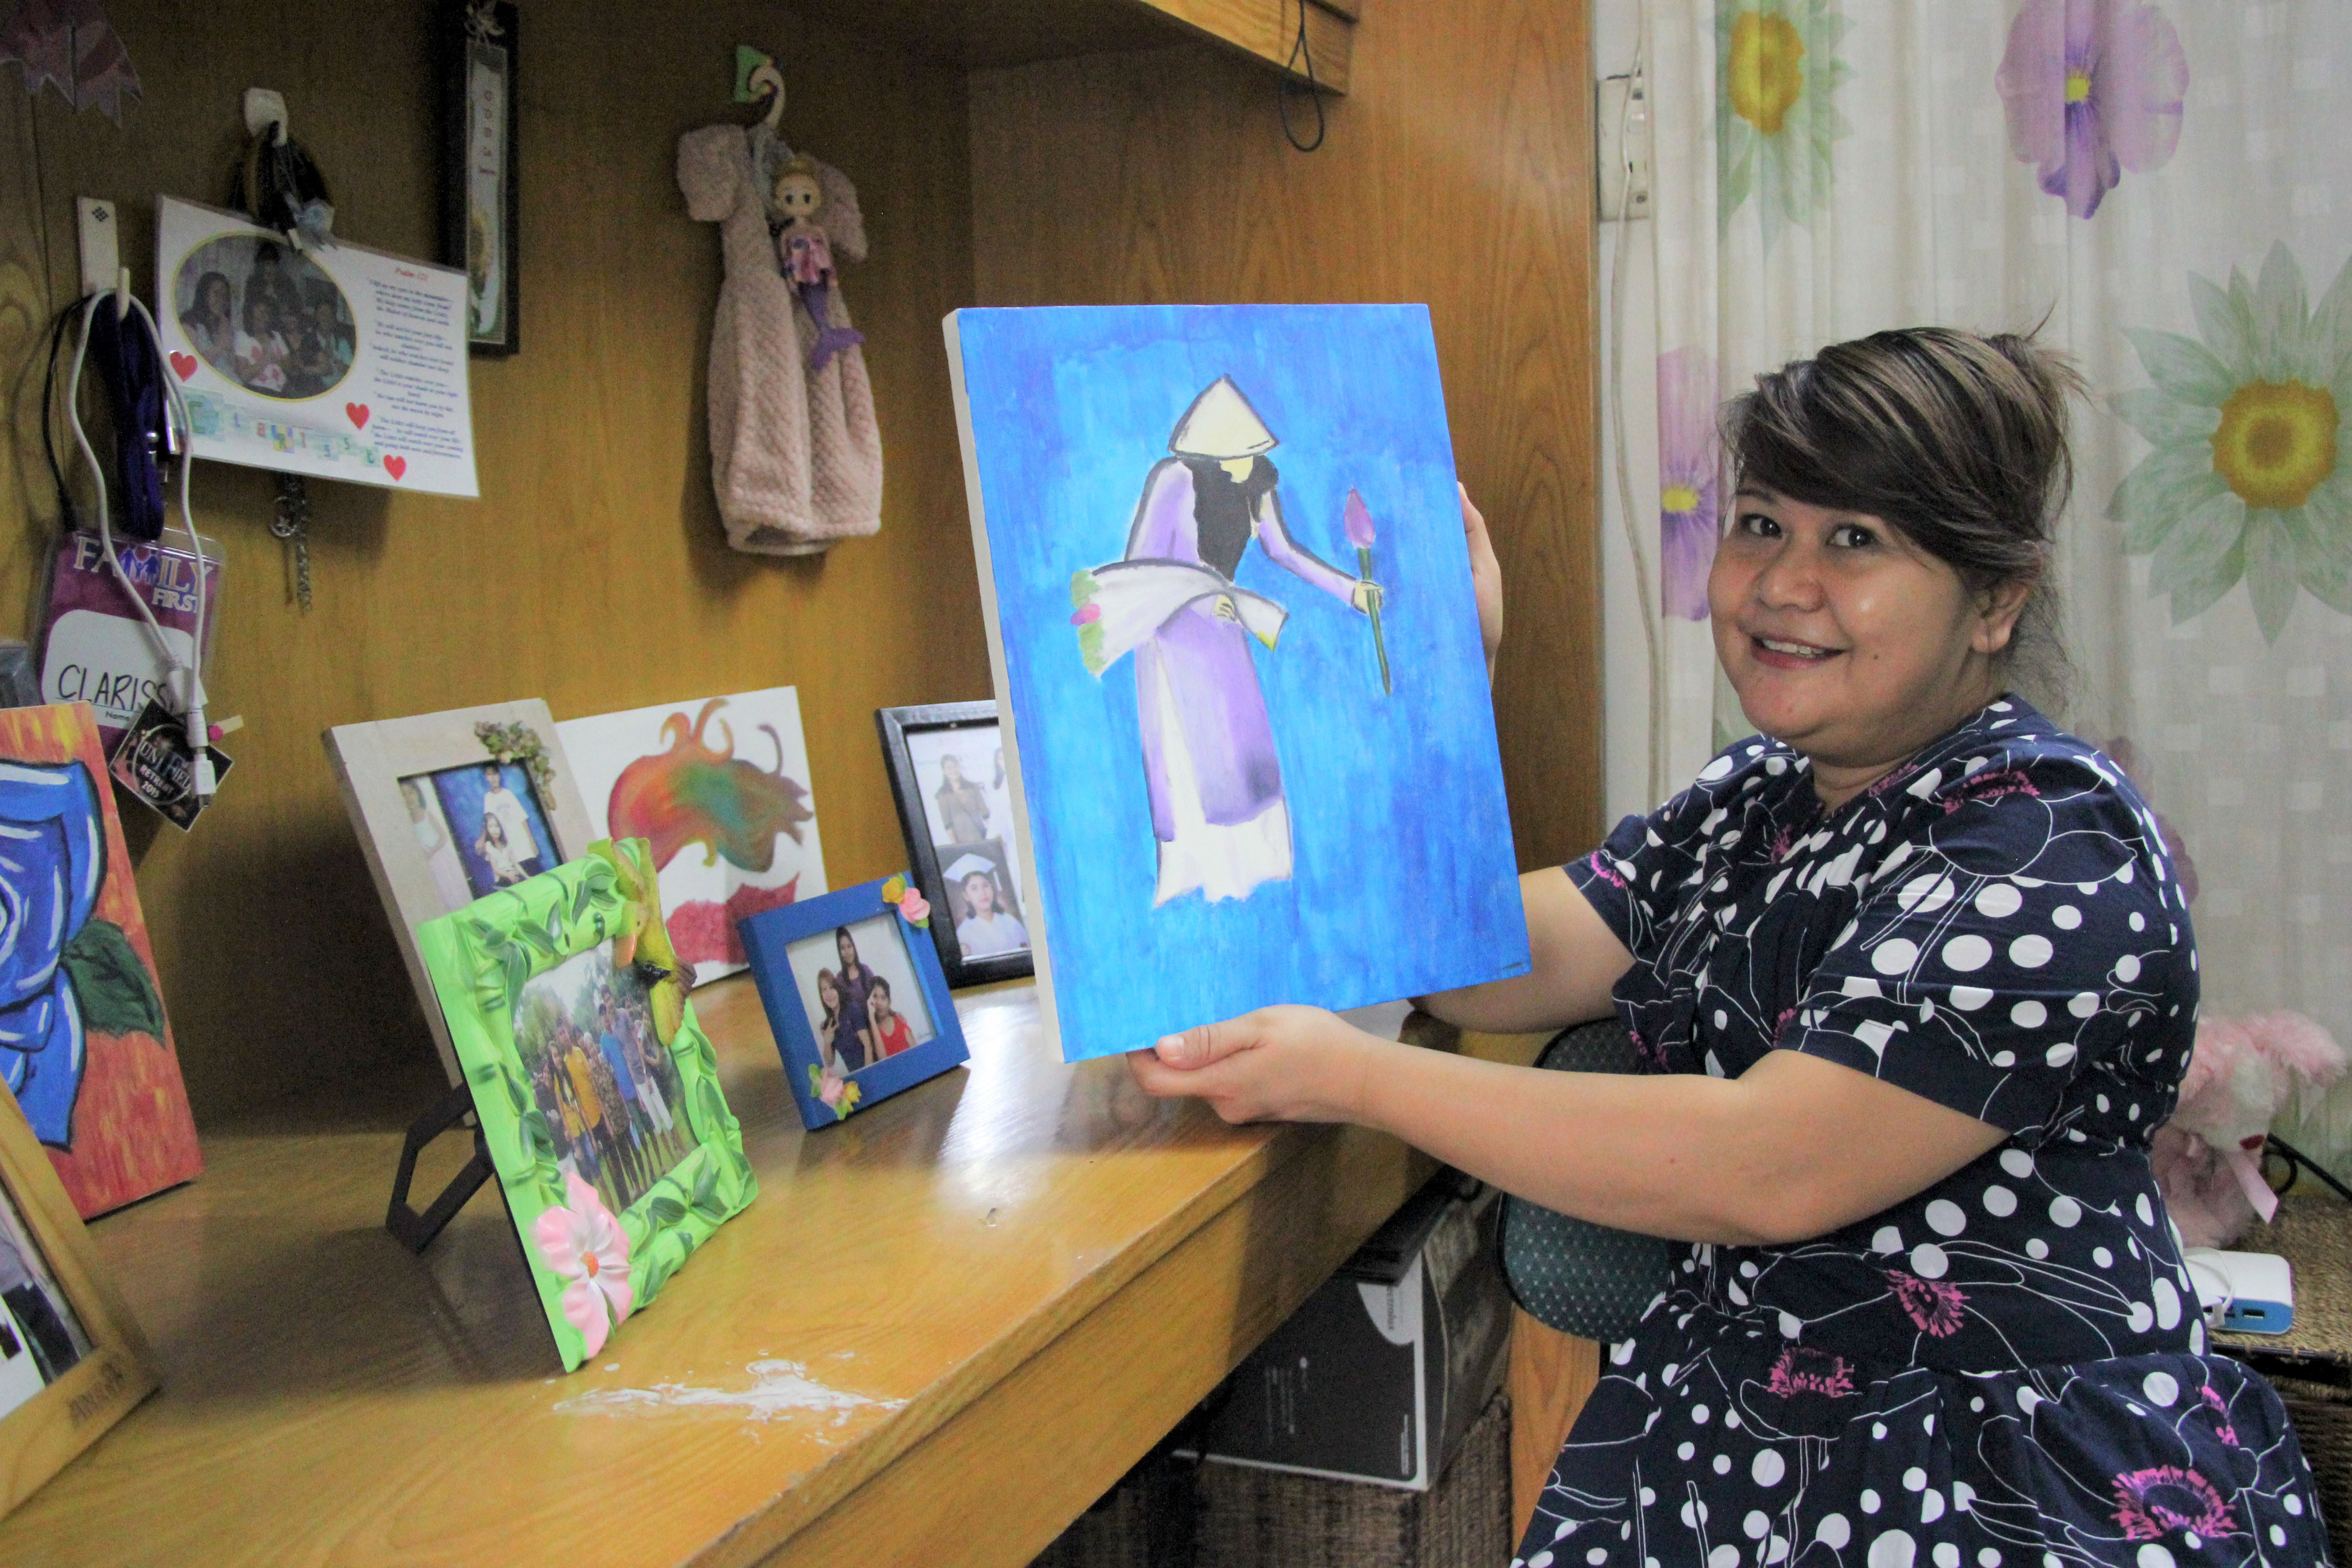 Clarisse Cantos shows a painting made by her daughter displayed her rented room in District 3. Photo: Tuoi Tre